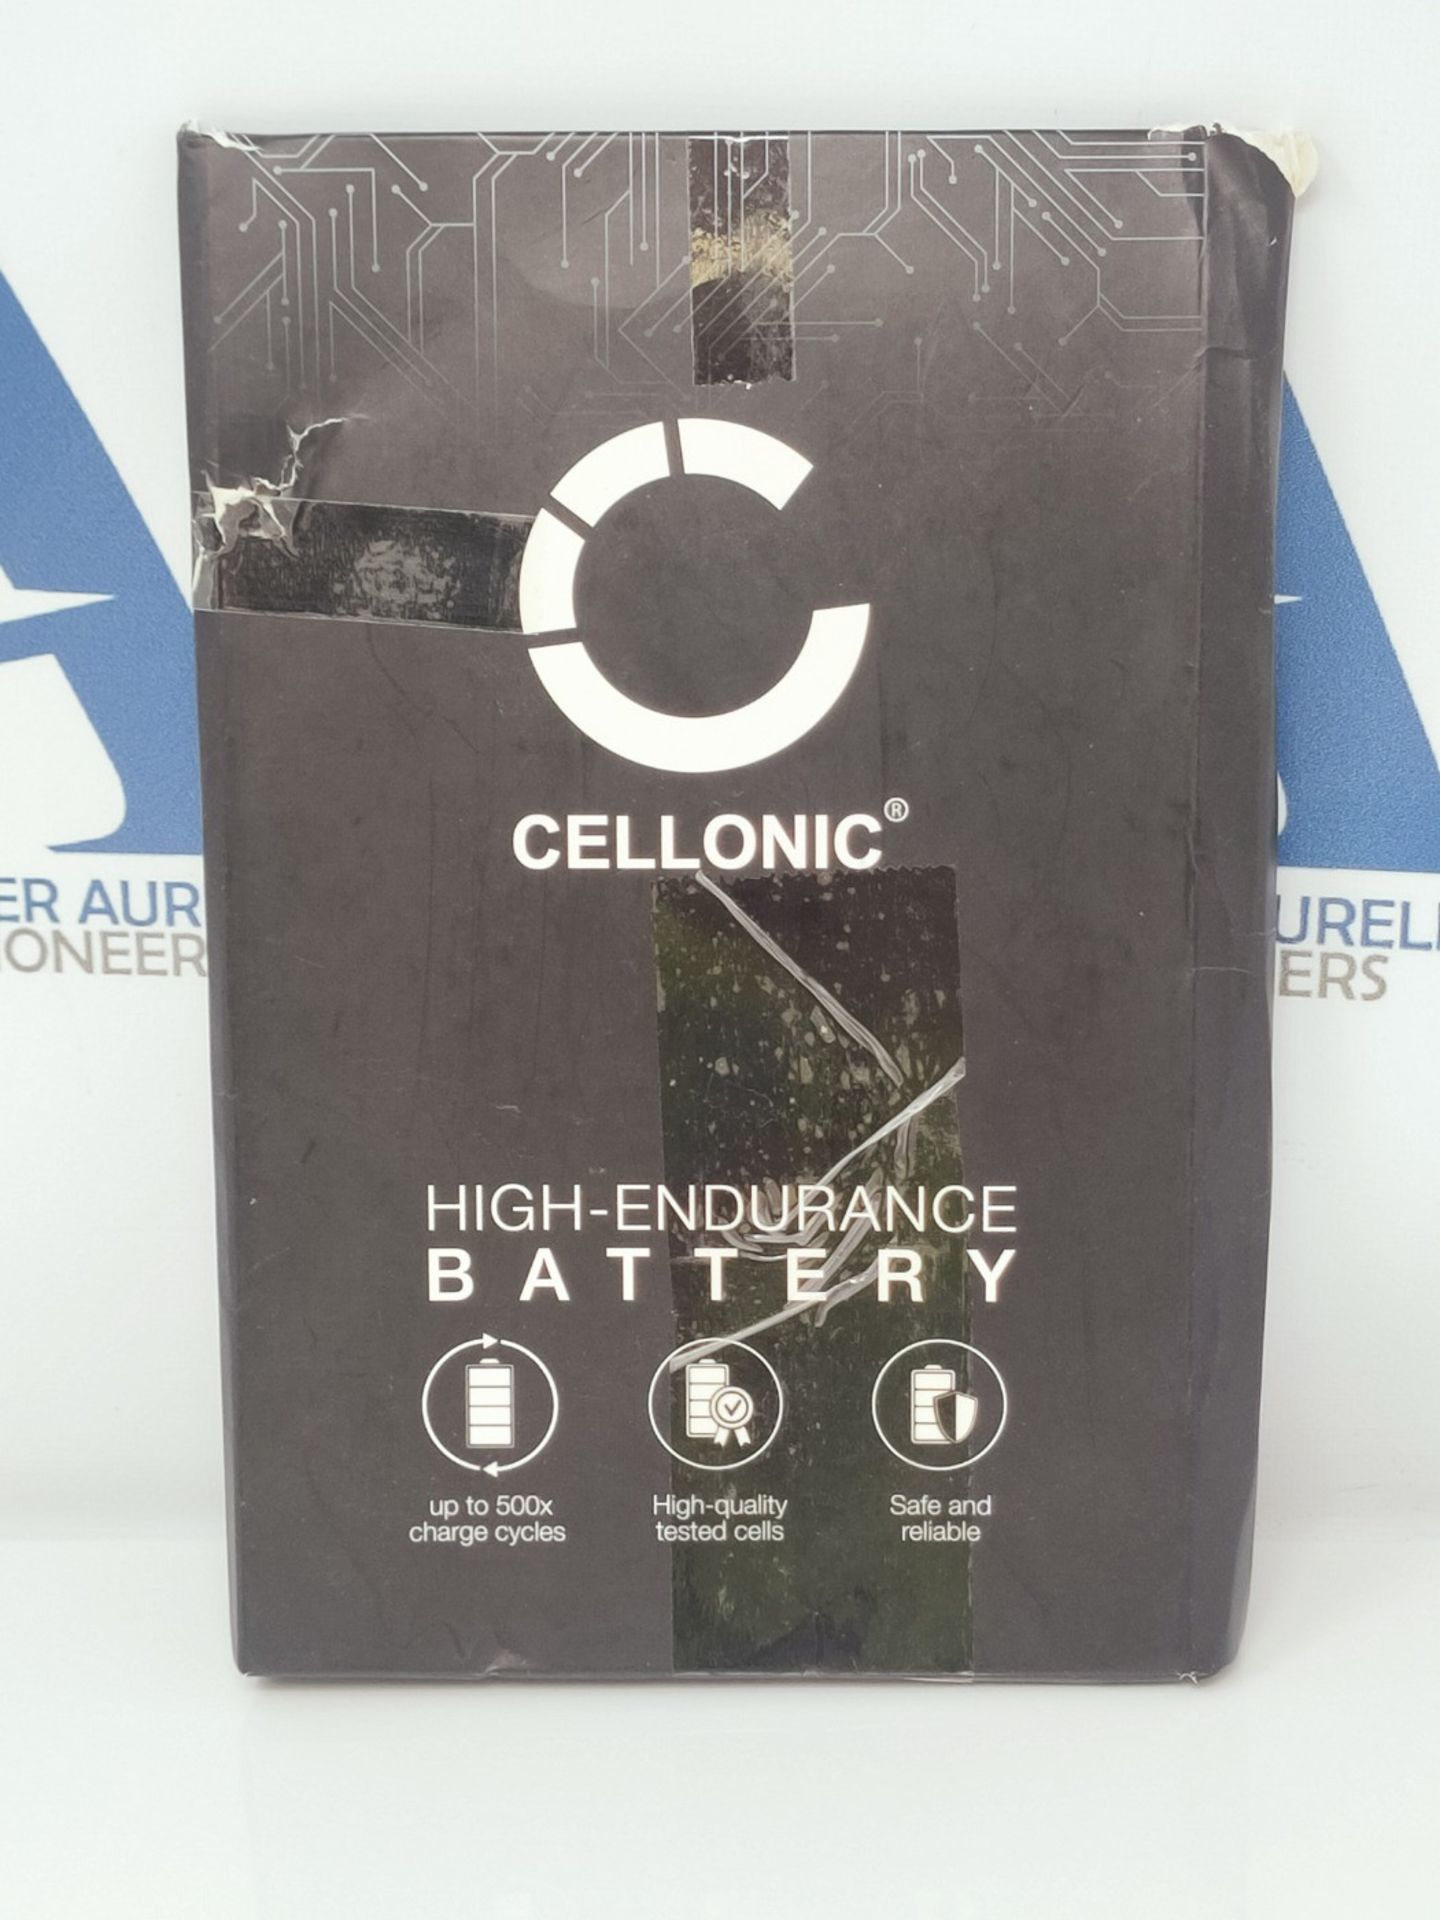 CELLONIC® Replacement Tablet Battery for Samsung Galaxy Tab S 10.5 (SM-T800 / SM-T805